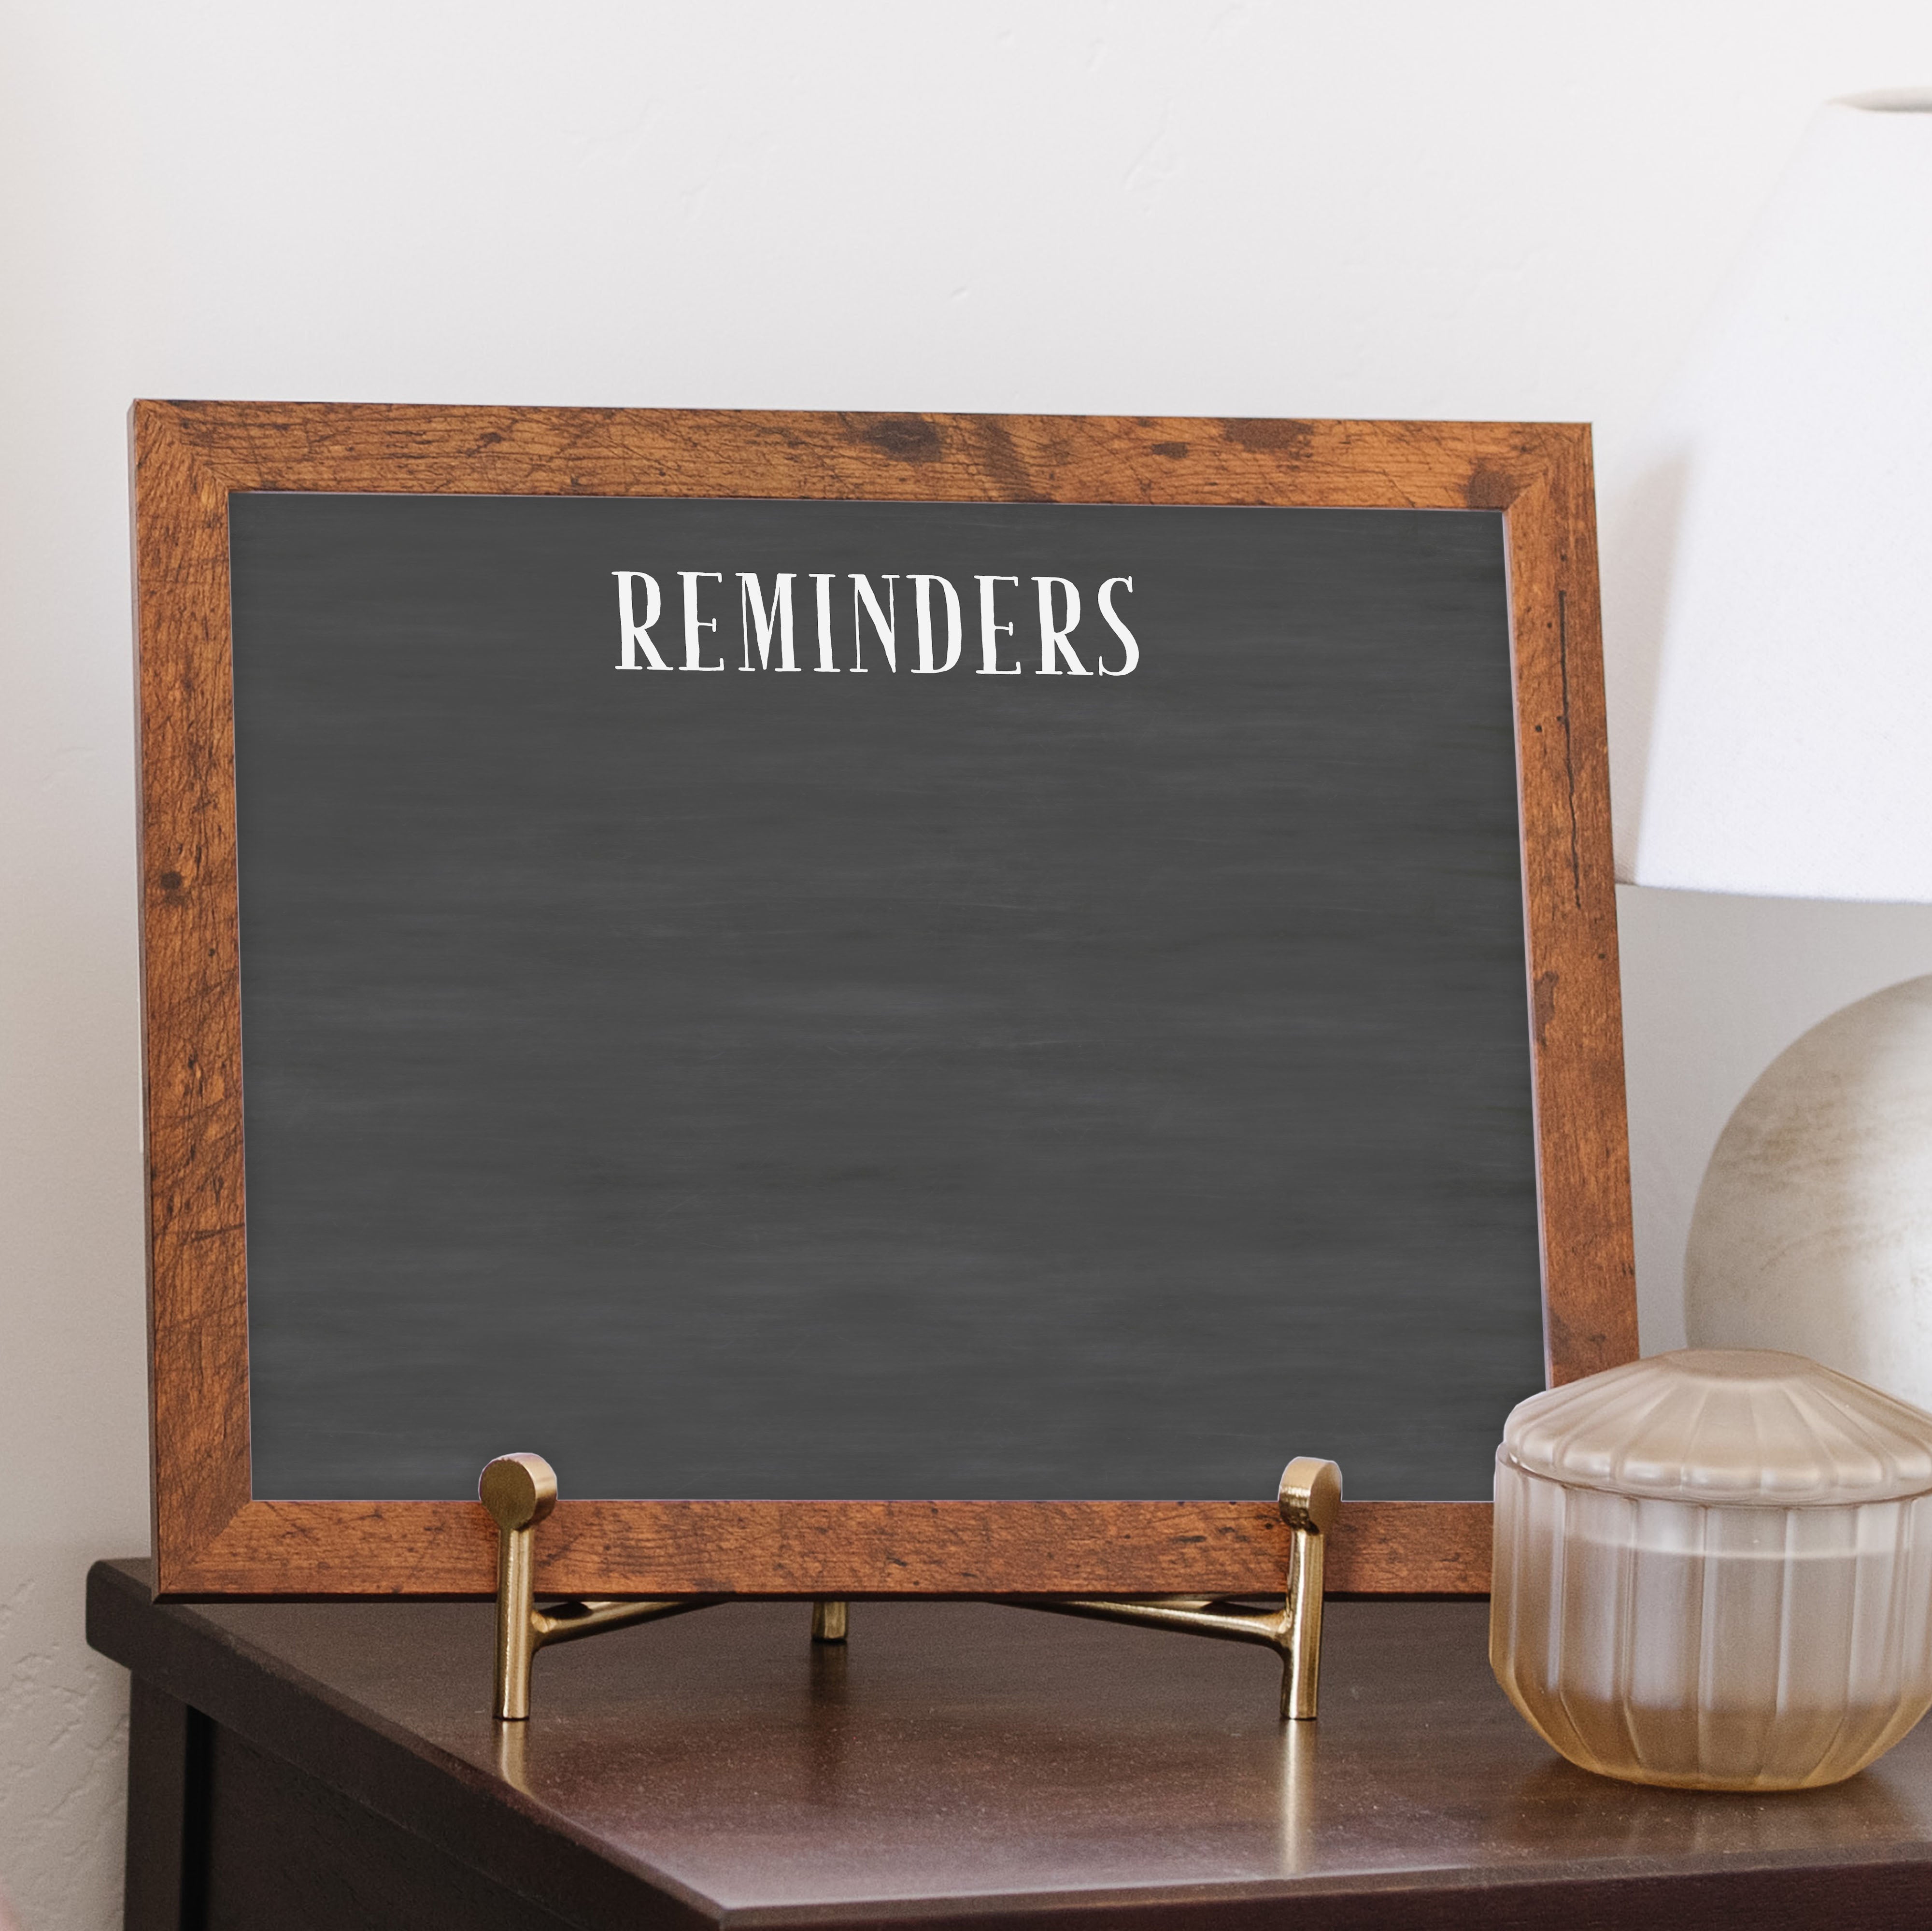 A framed dry-erase chalkboard calendar with a two month design format hanging on the wall